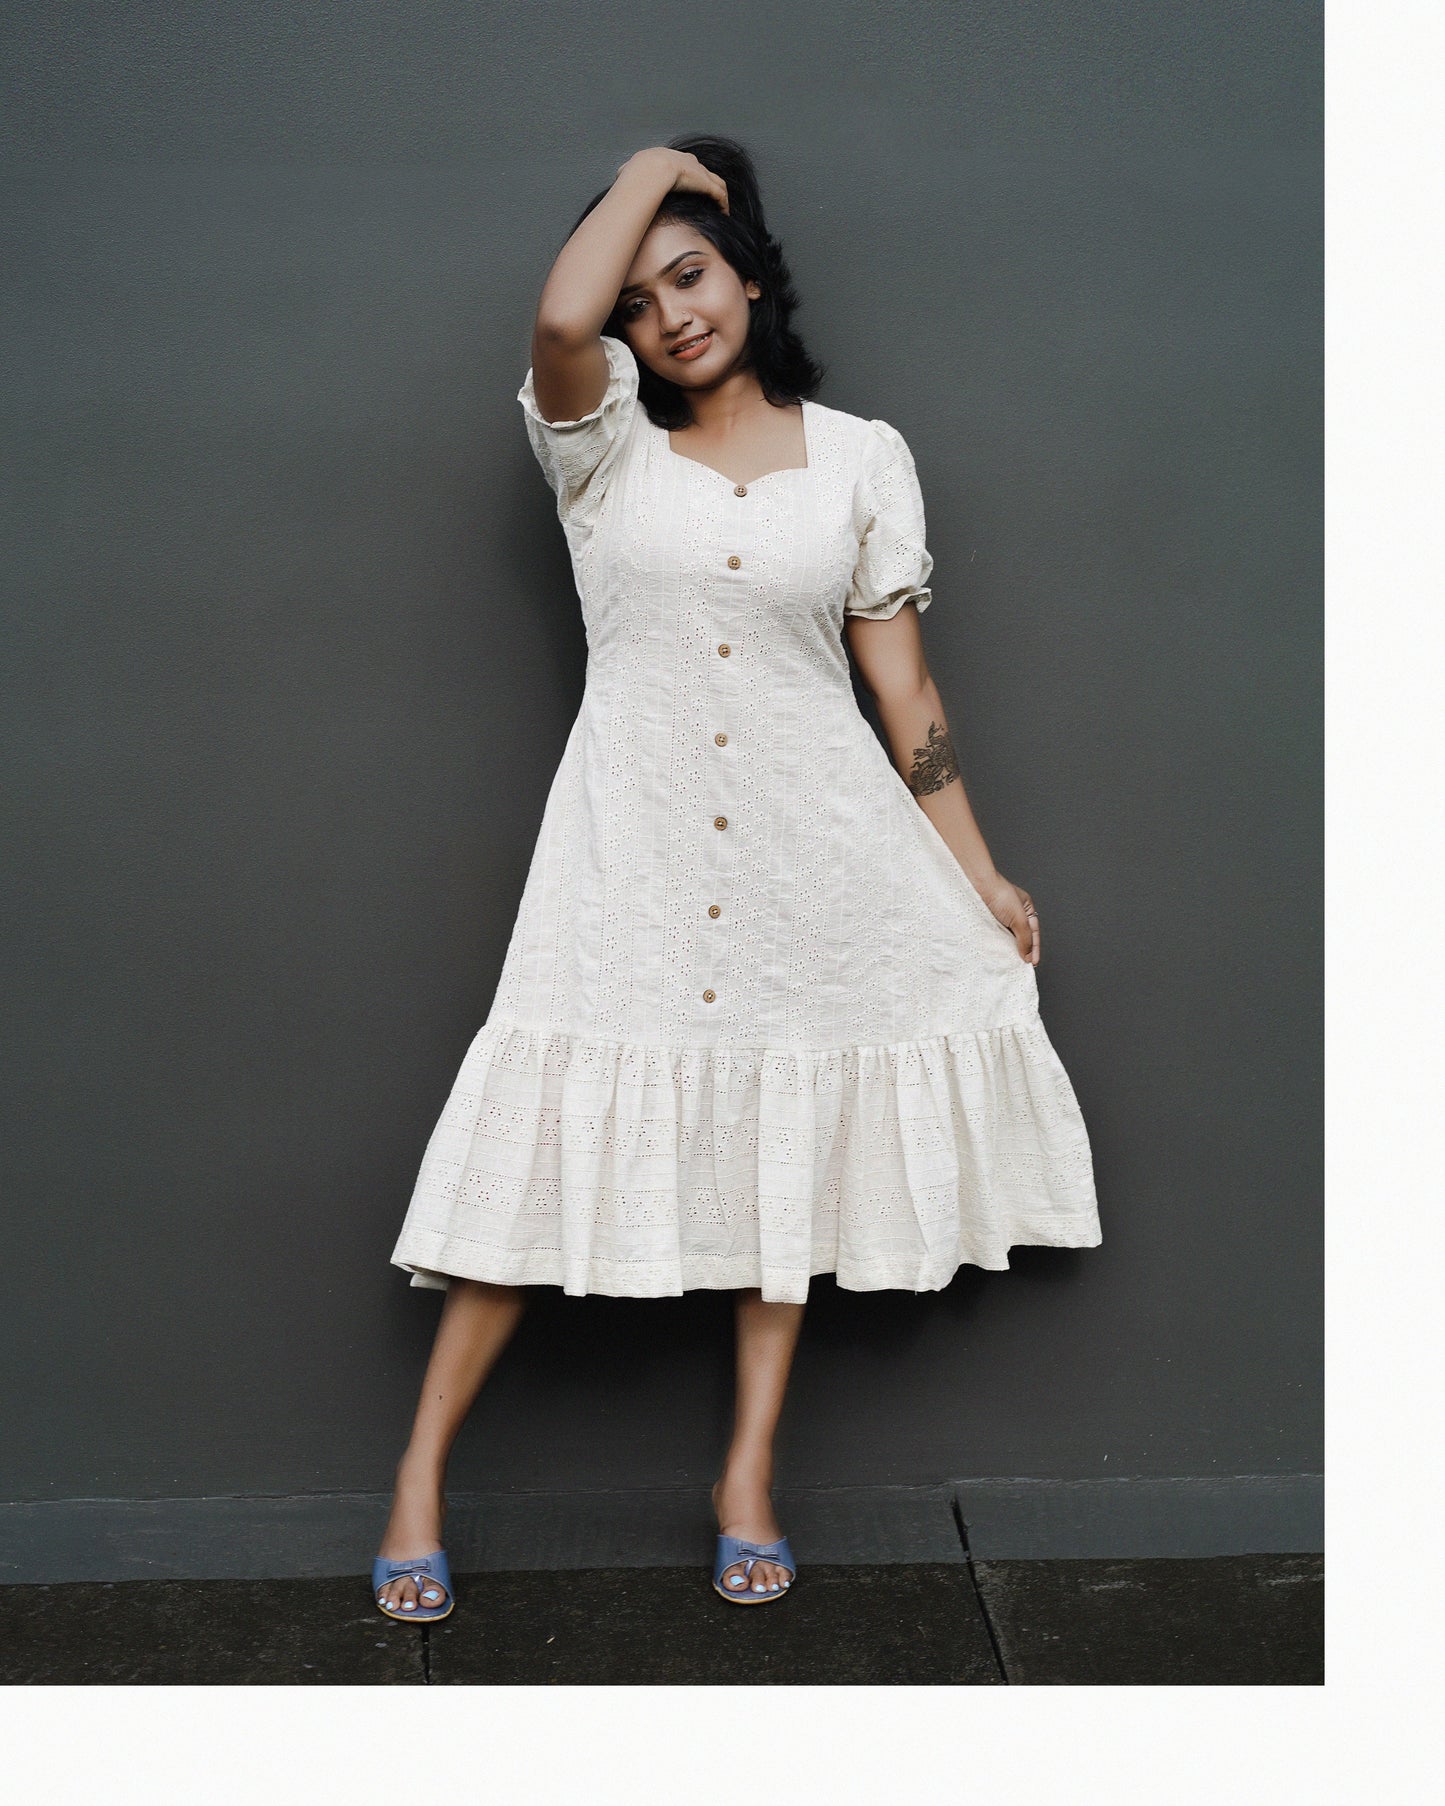 Hacoba Cotton - frock / dress / aline / kurti  in Cream shade with Crepe lining